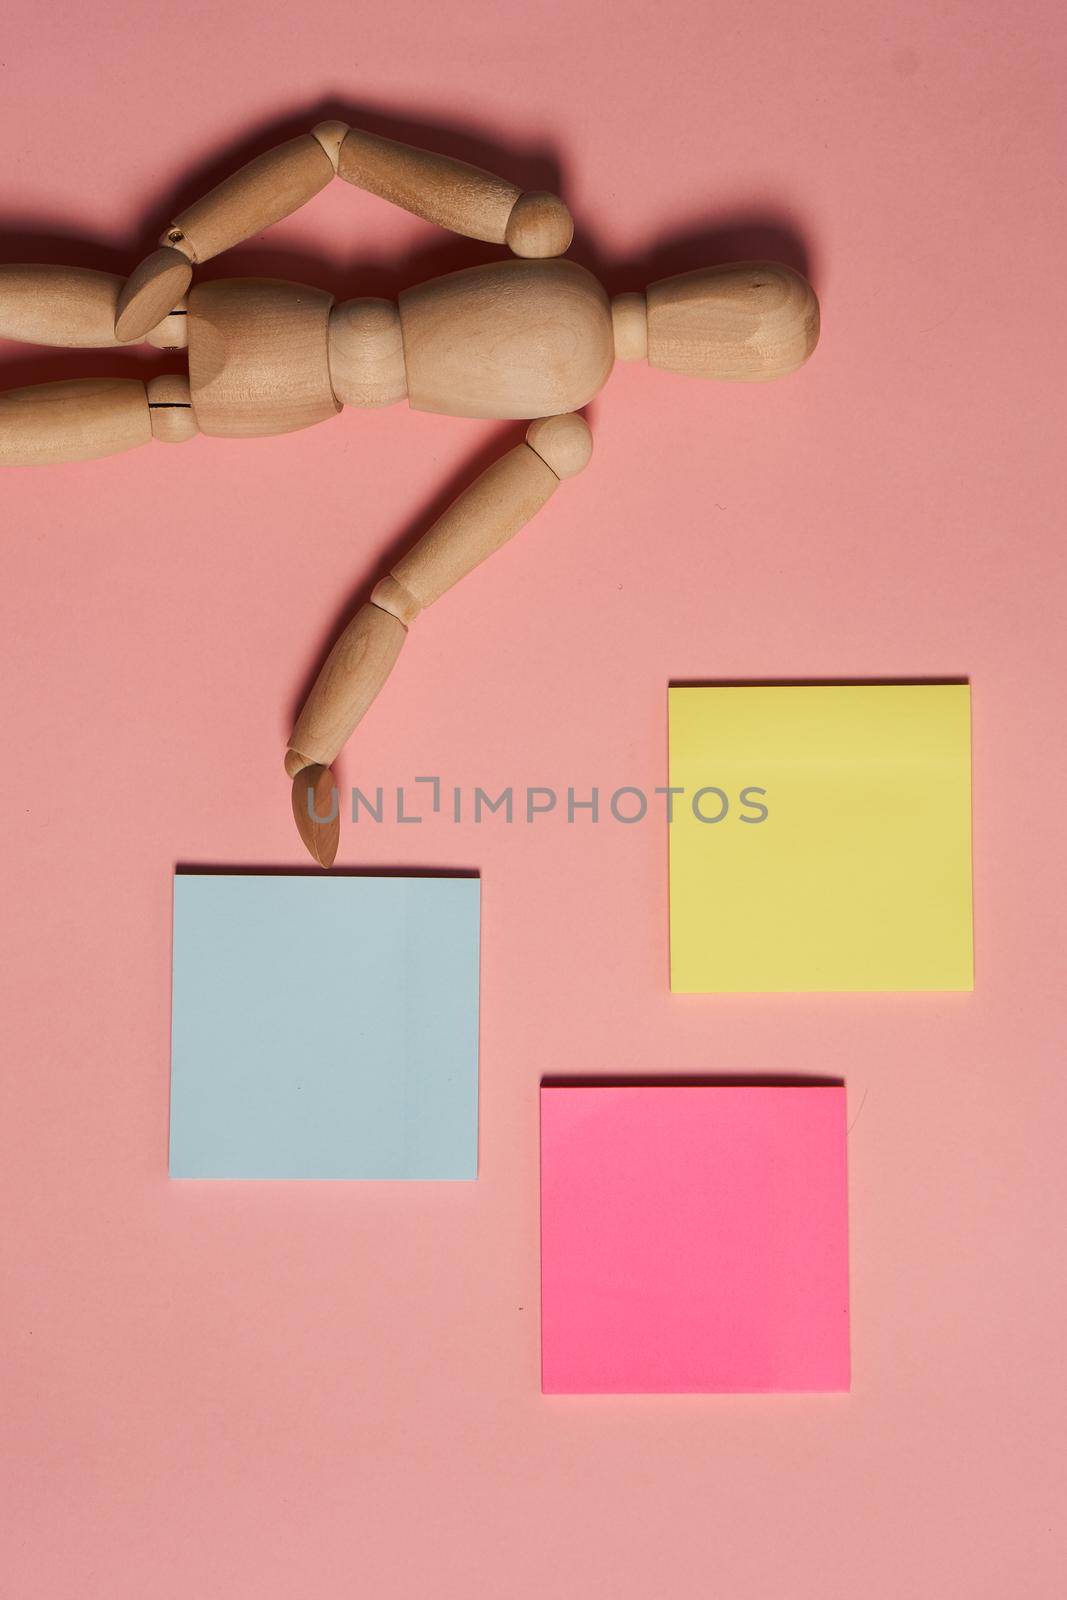 objects of art paint brushes art items abstract paper pink background. High quality photo